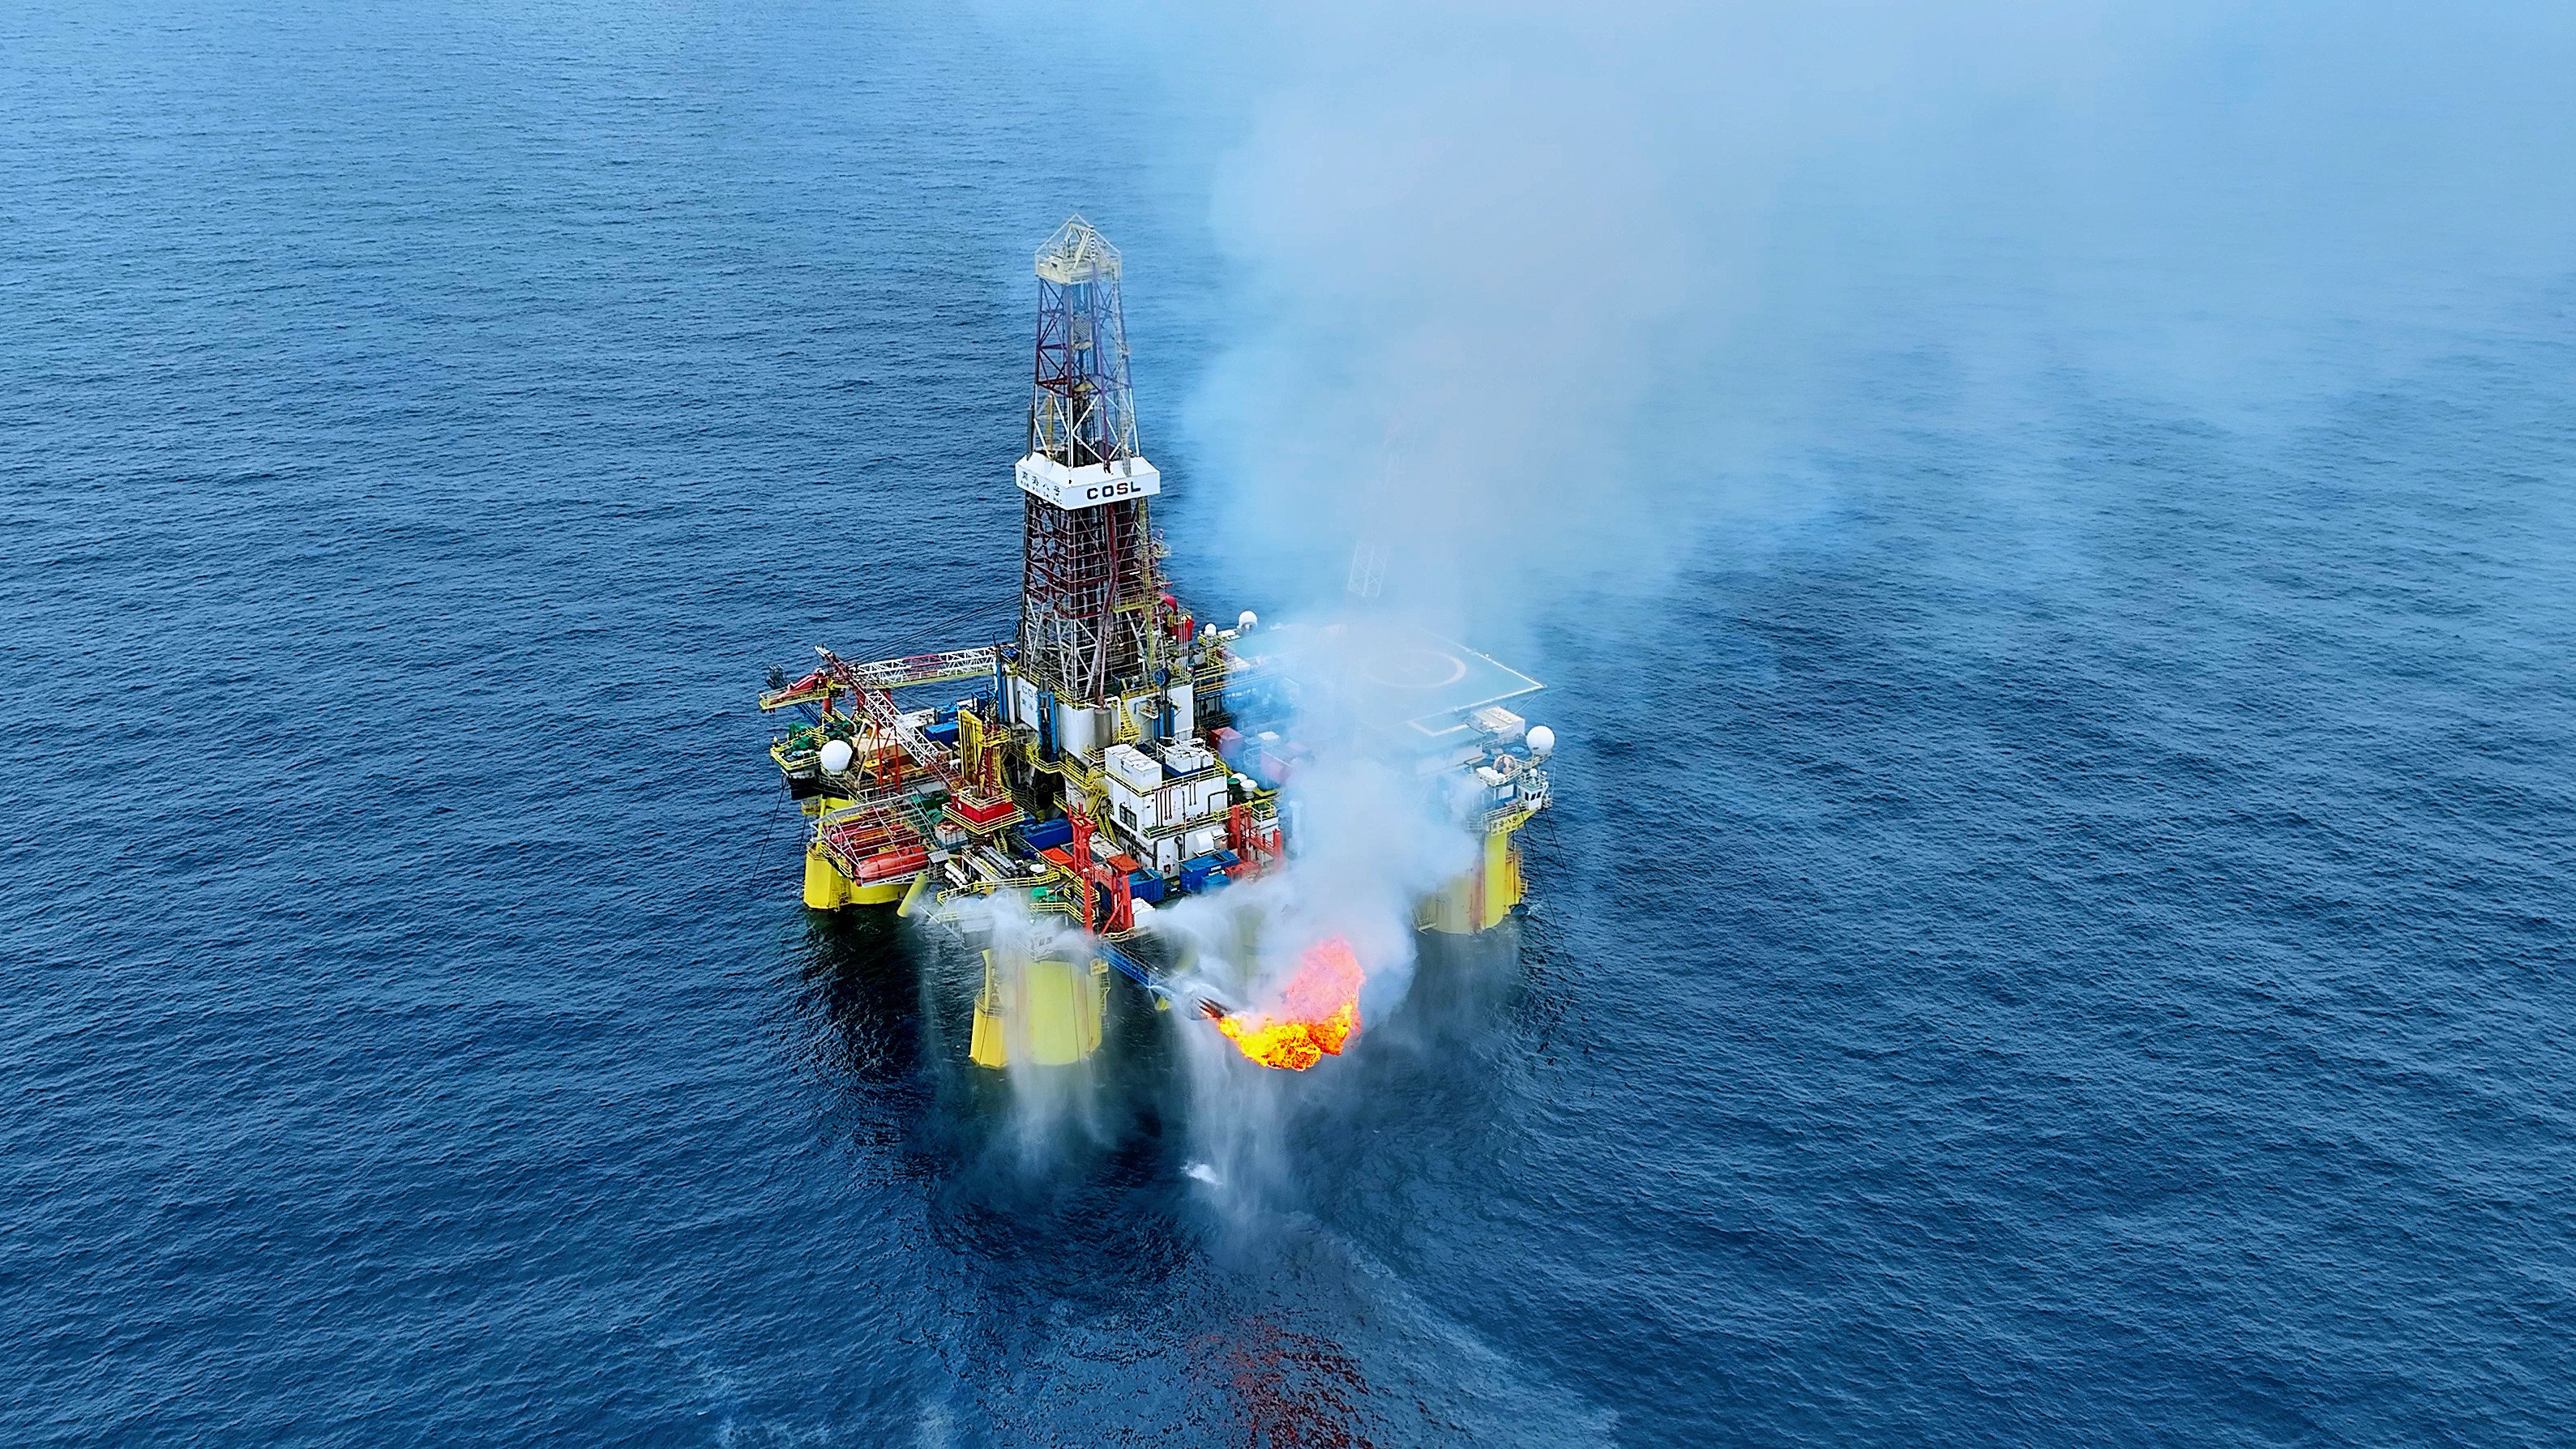 A drilling platform at the Kaiping South oilfield in the eastern part of the South China Sea. Photo: Xinhua